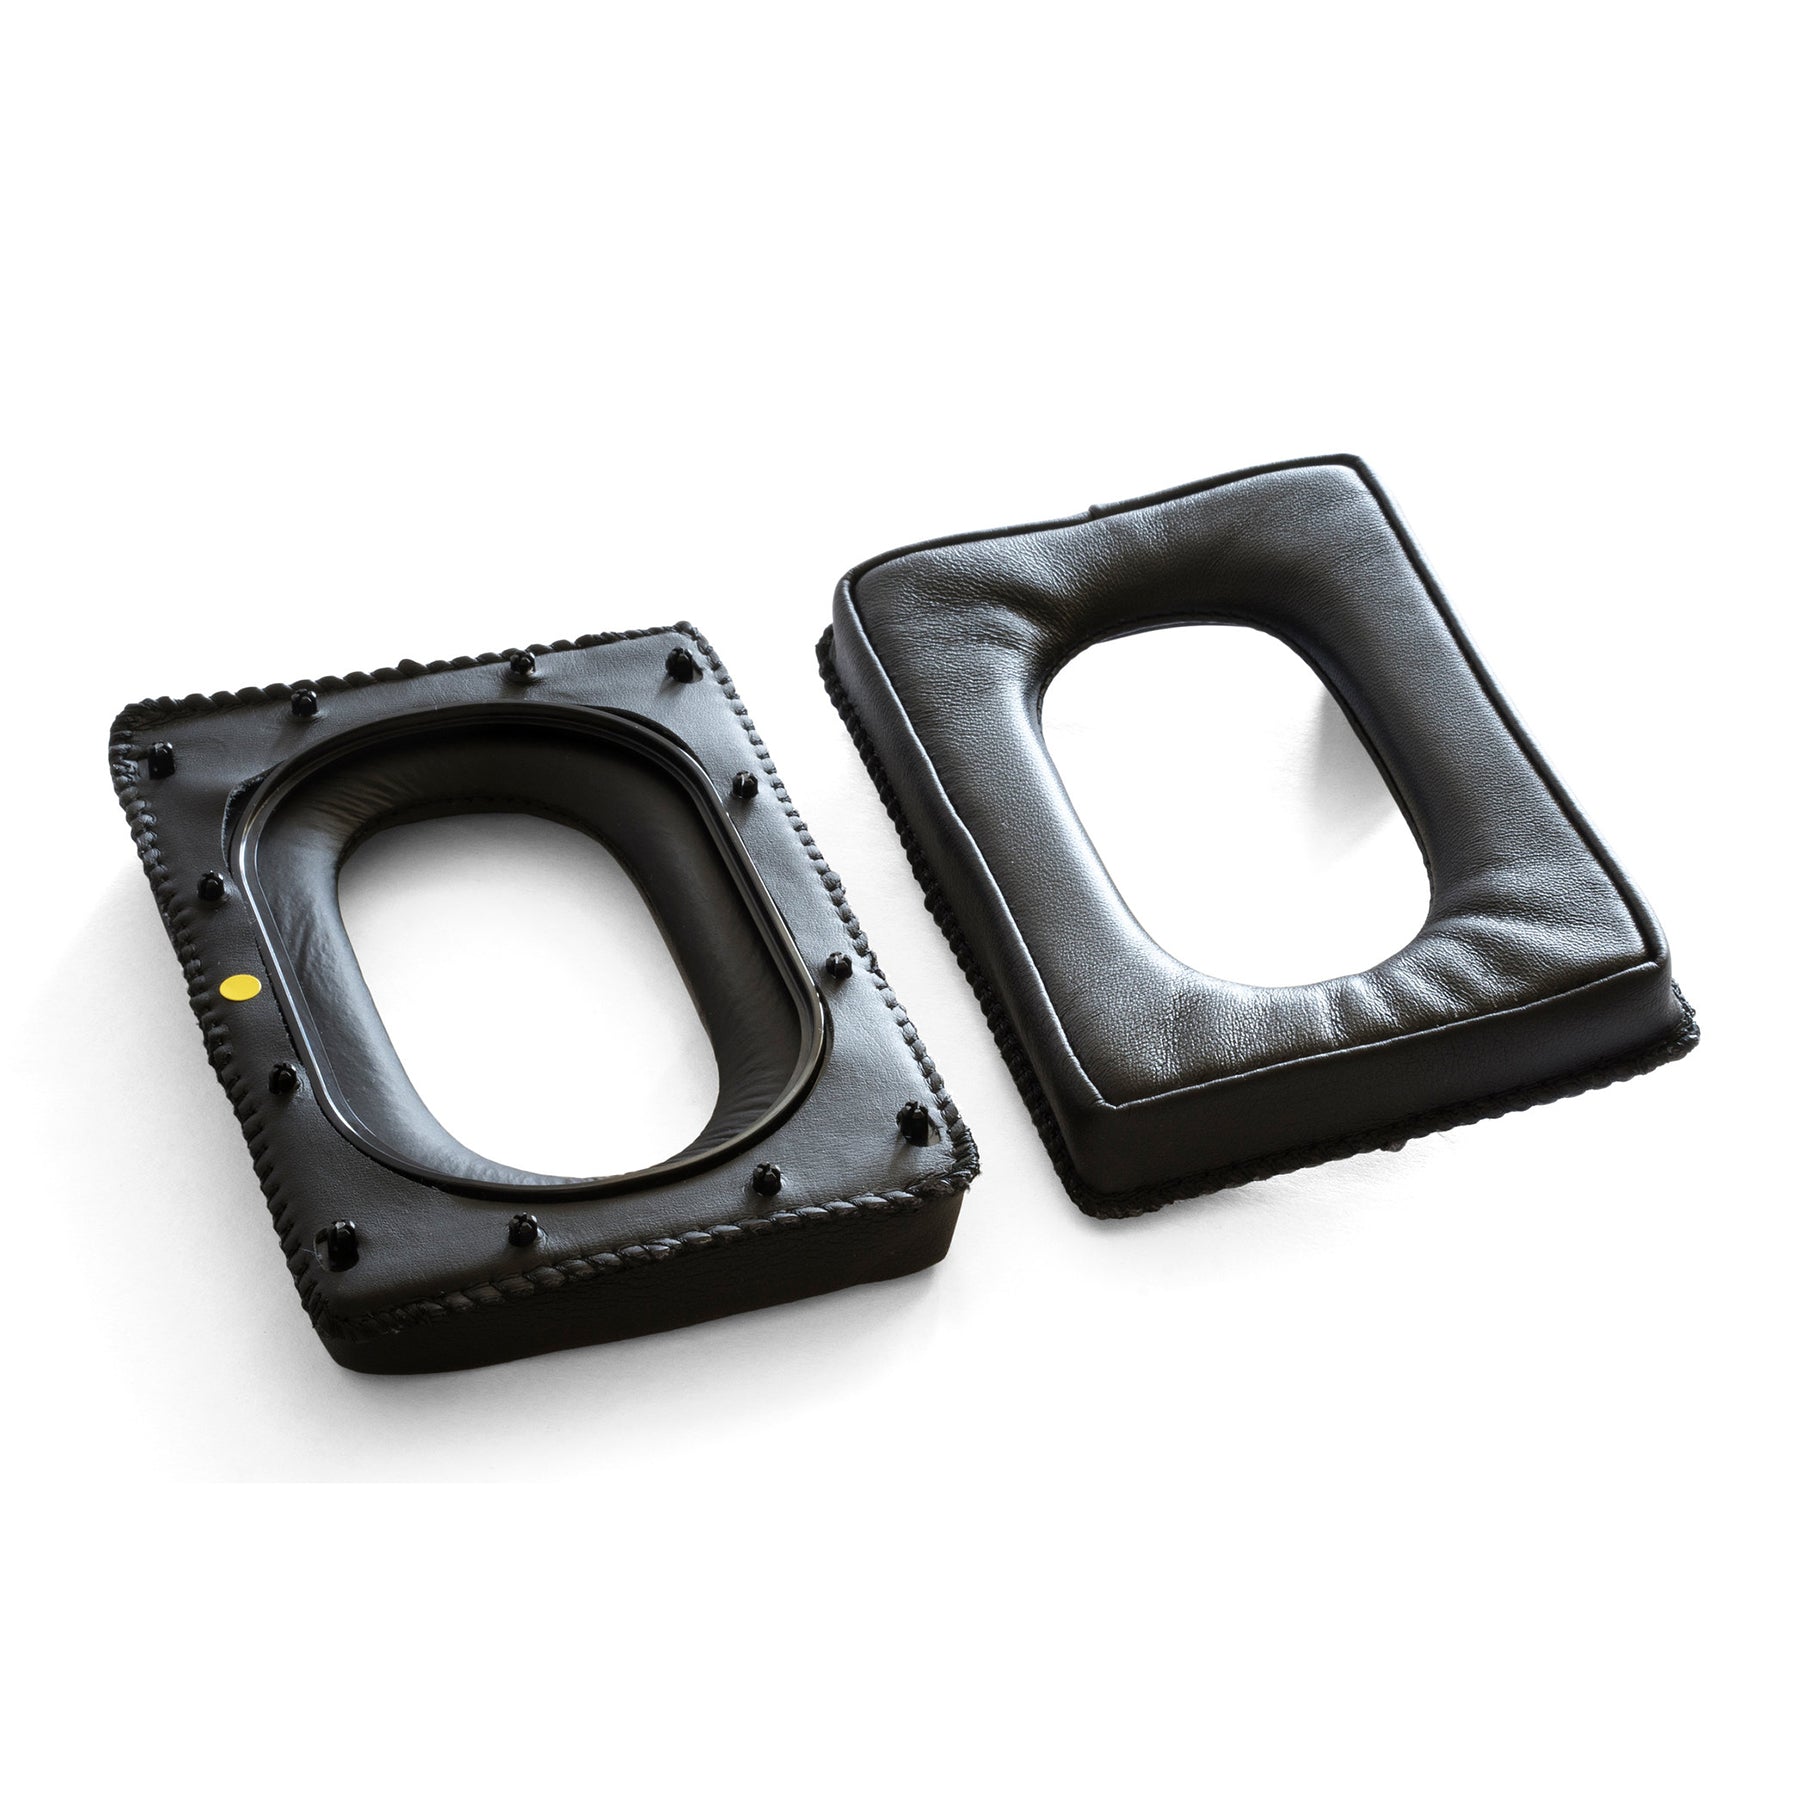 STAX EP-SRL500 Mk2 Replacement Earpads